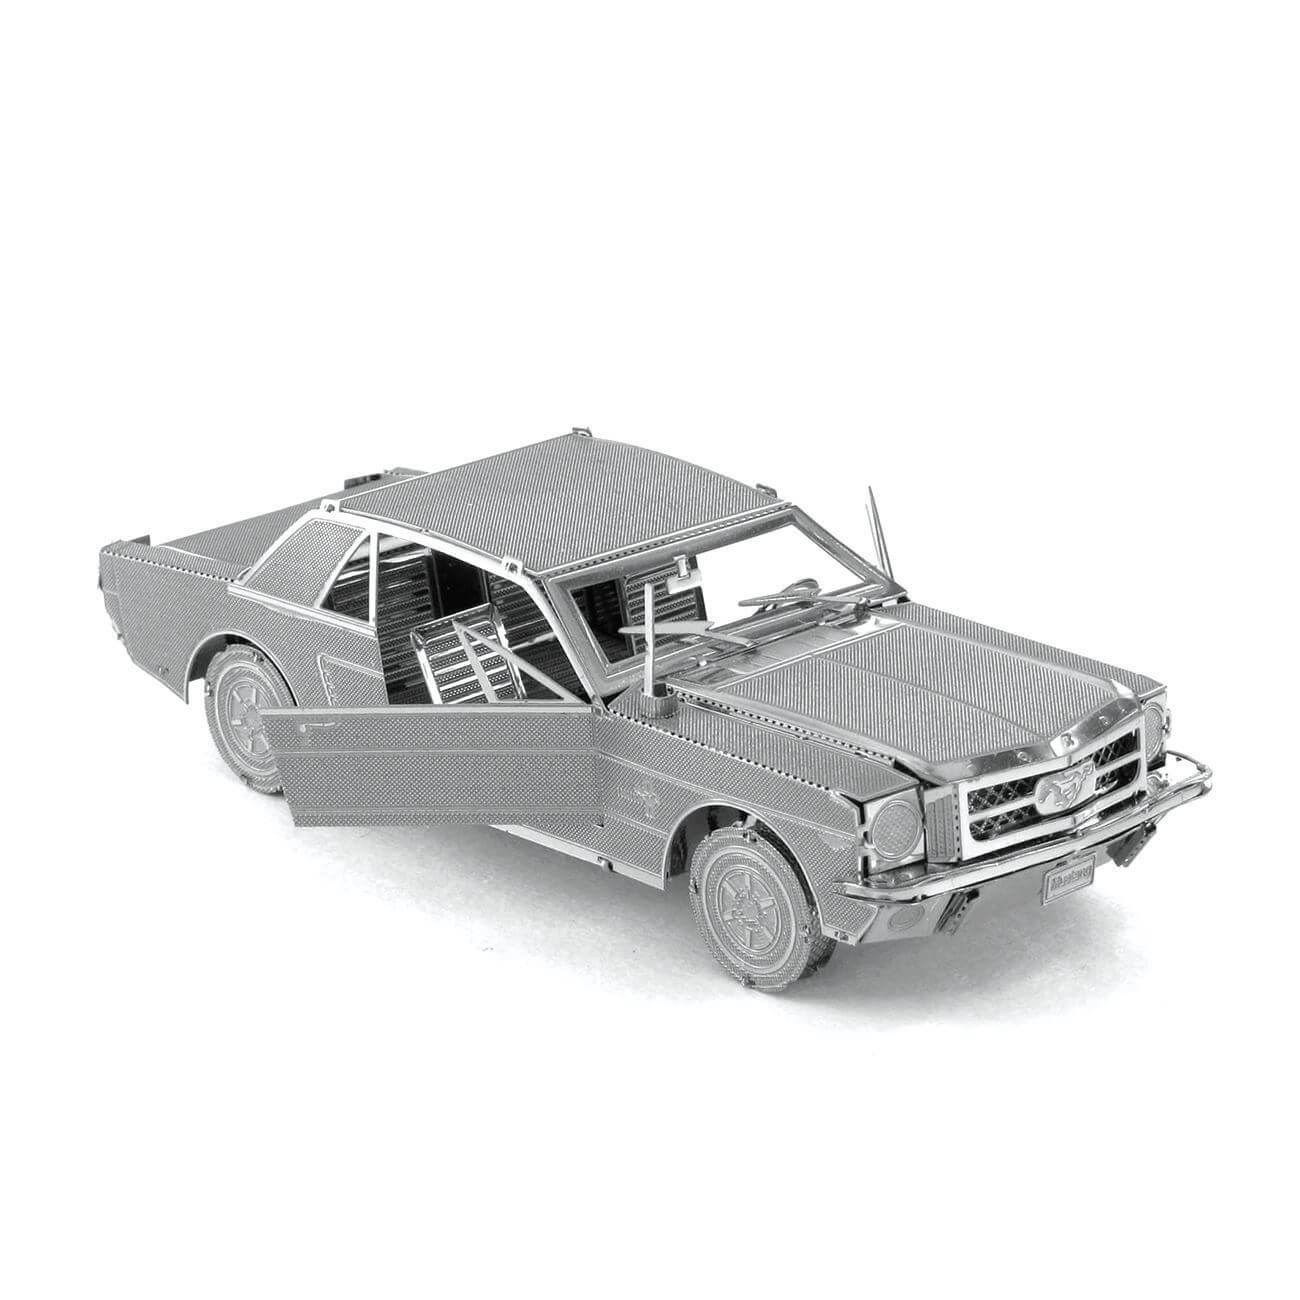 Metal Earth Ford 1965 Mustang Coupe Metal Model Kit - 2 Sheets